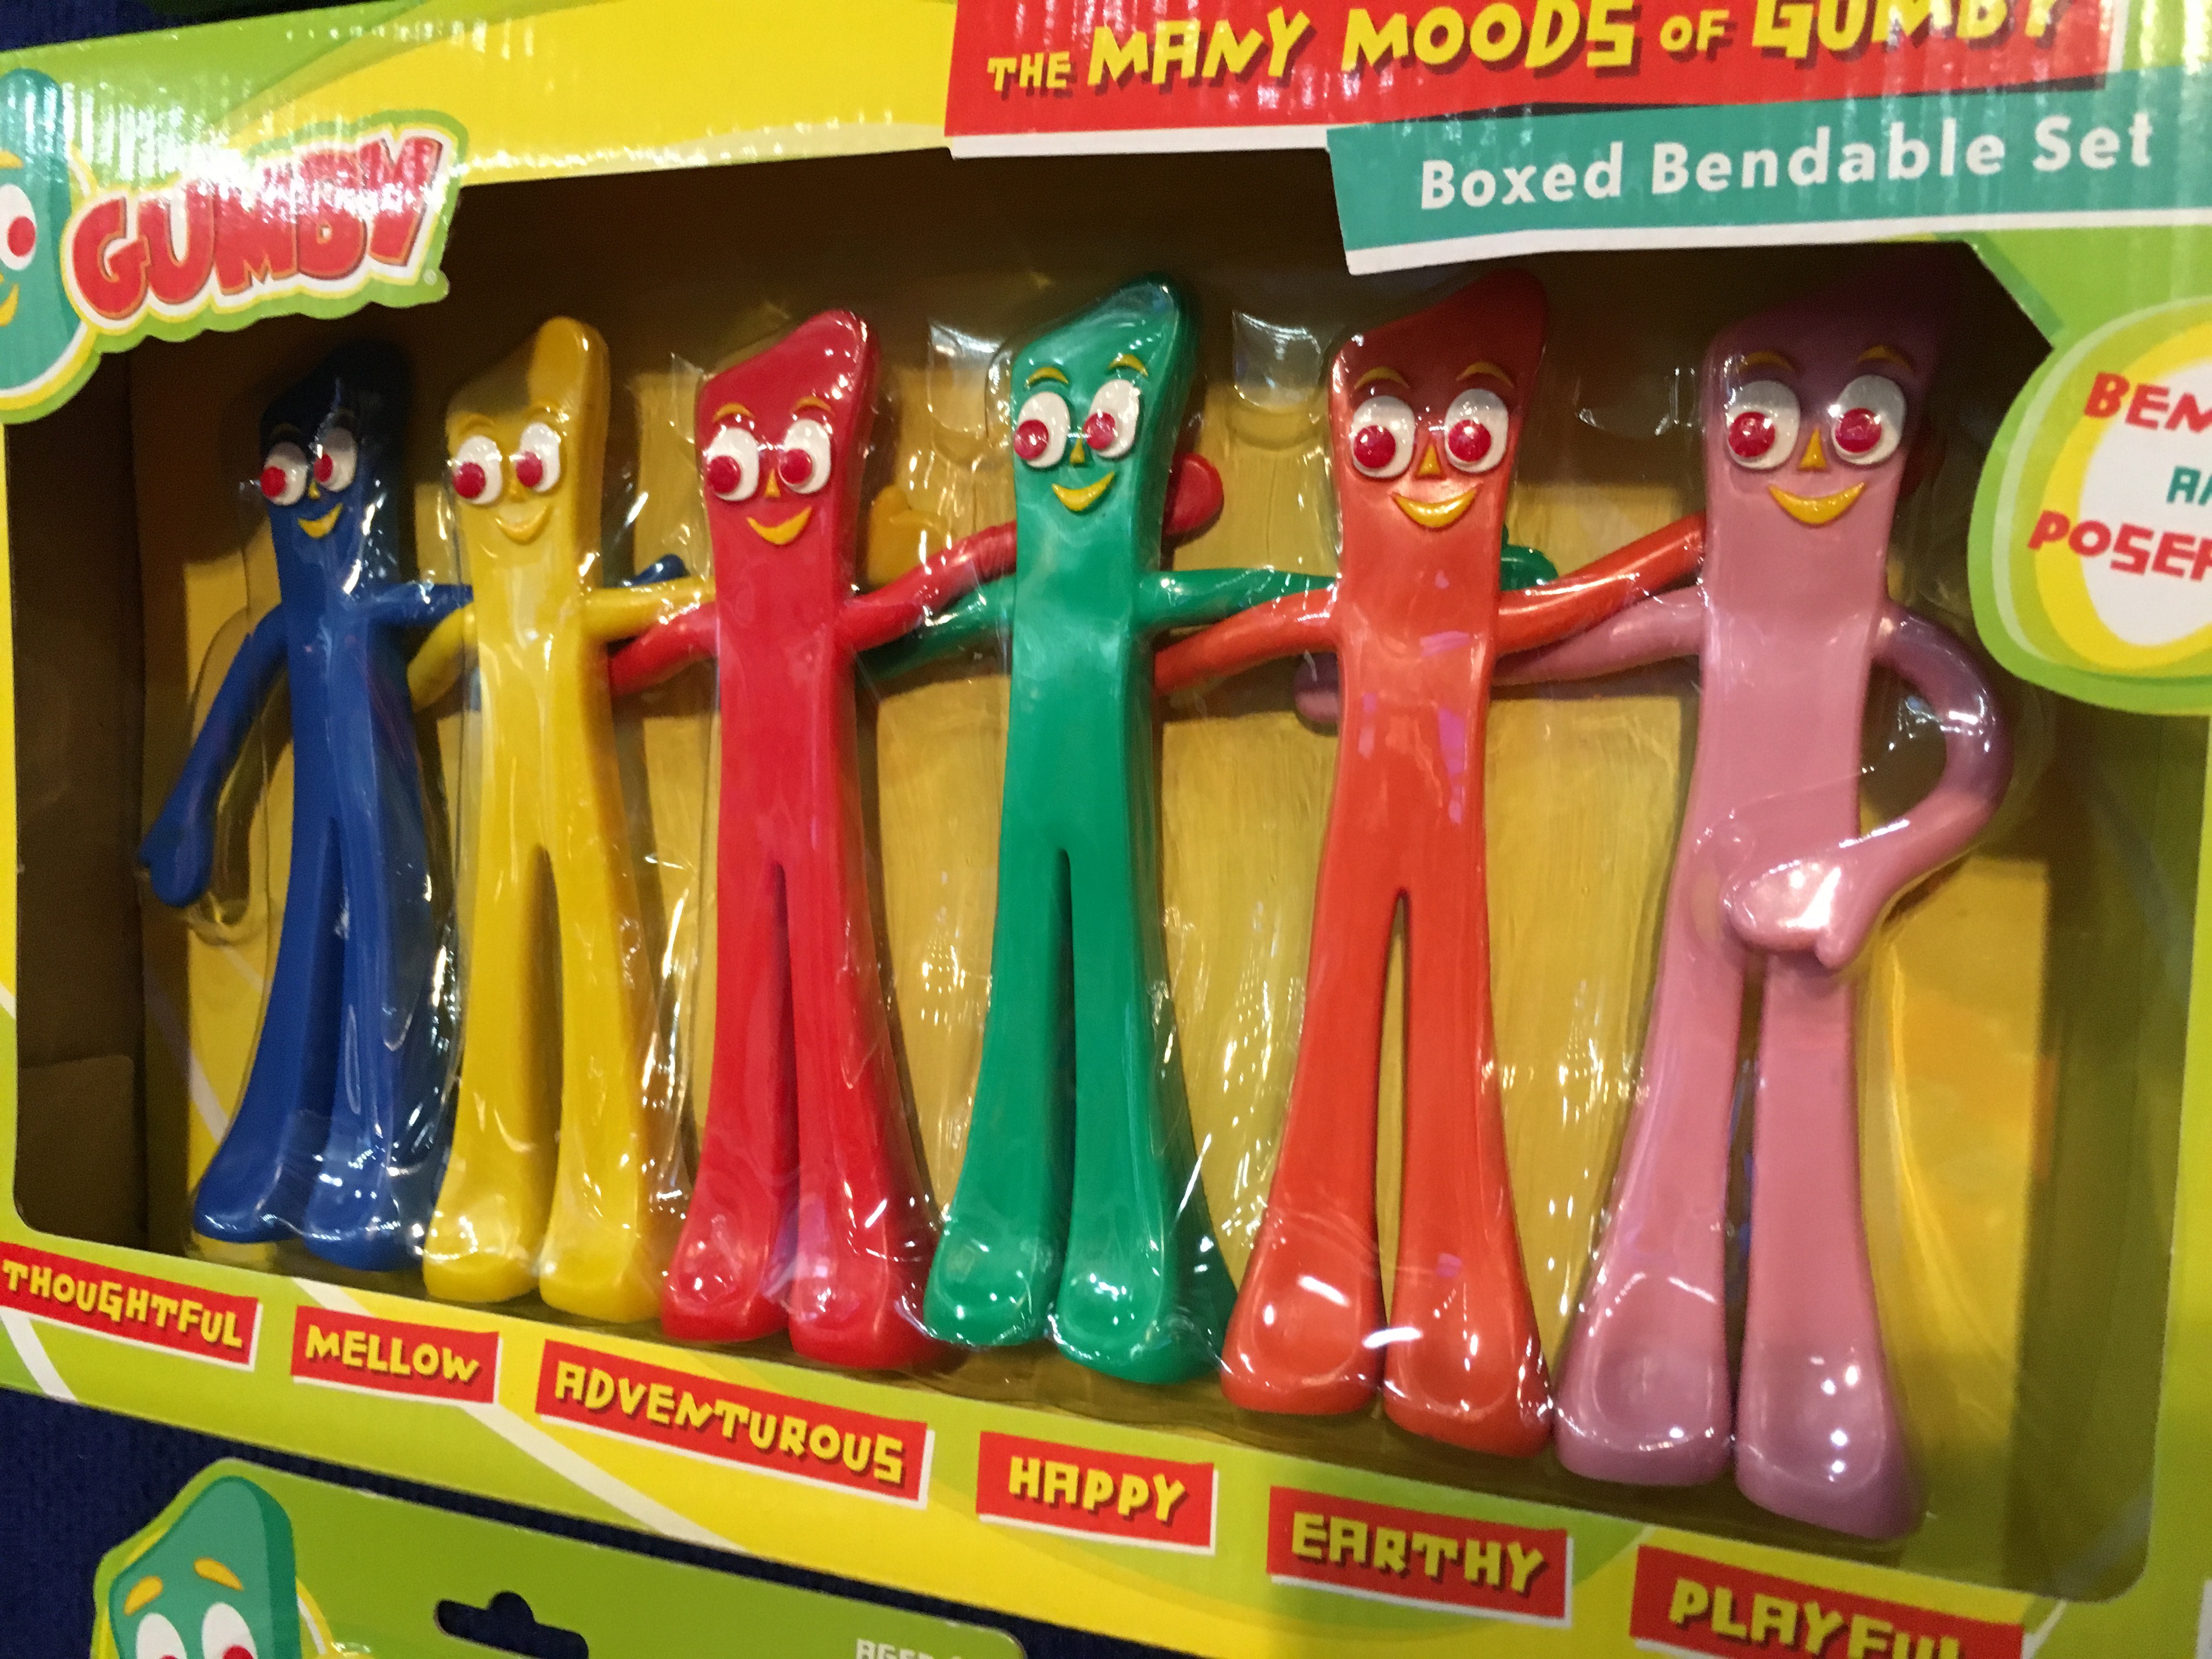 They're GUMBY DAMMIT